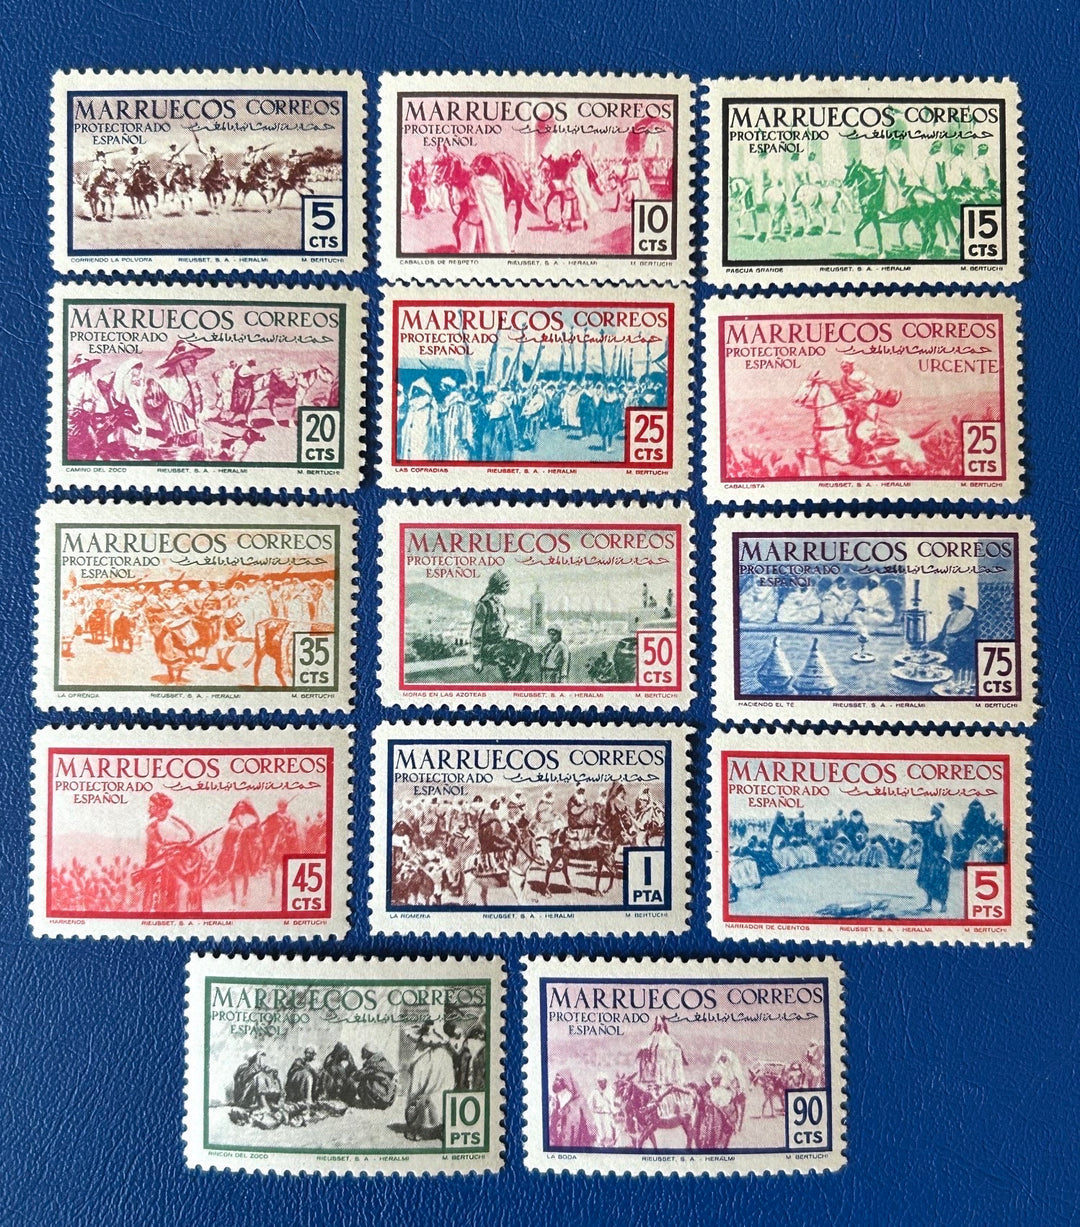 Sp. Morocco - Original Vintage Postage Stamps- 1952 - Scenes of Indigenous Life - for the collector or crafter